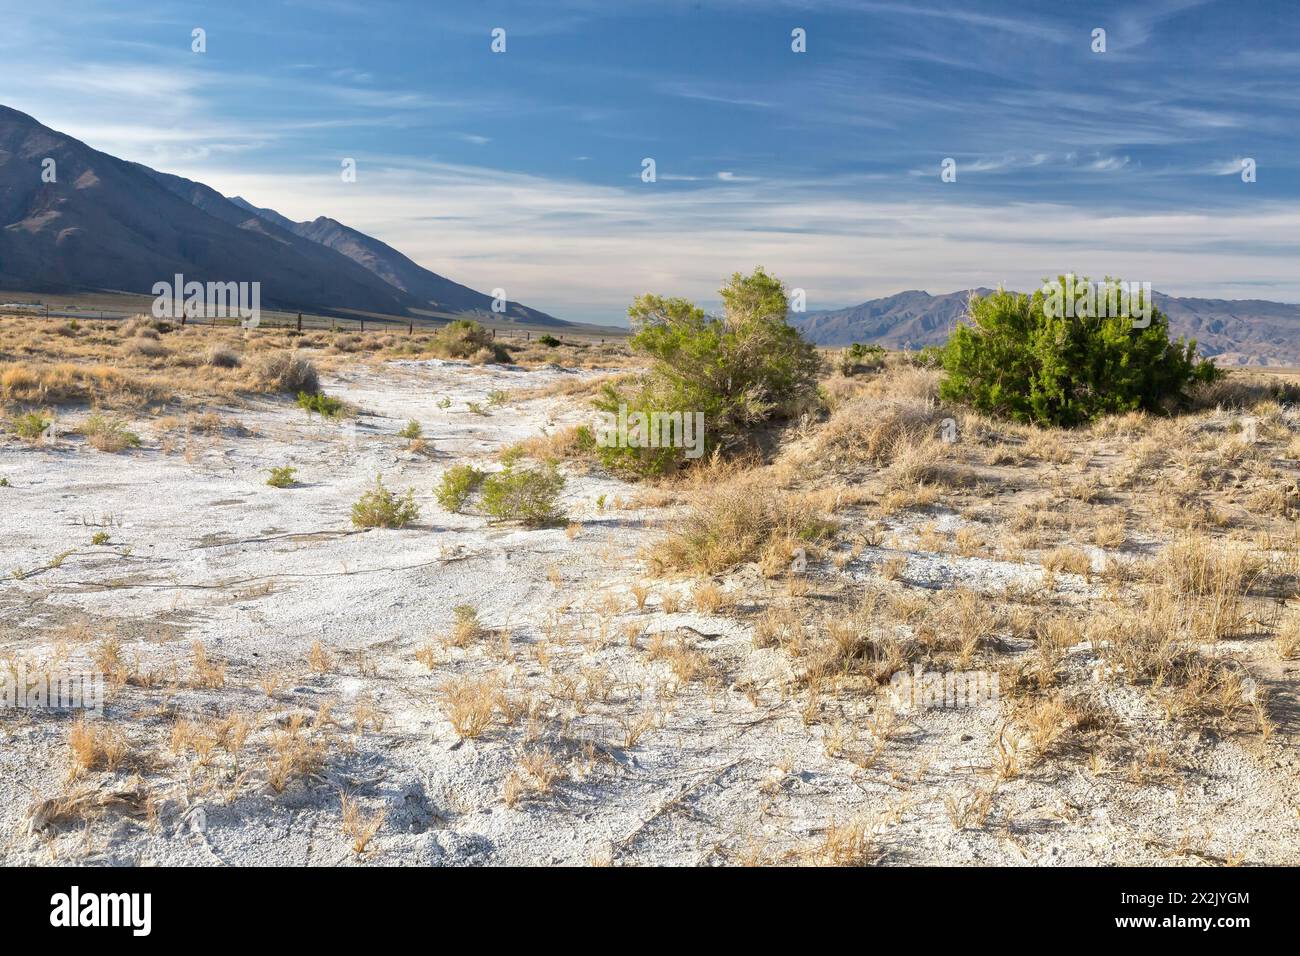 Owens Valley, Sierra Nevada Mountains (a sinistra), Panamint Mountains a destra, Trona 'Sodium sesquicarbonate' minerale naturale. Foto Stock